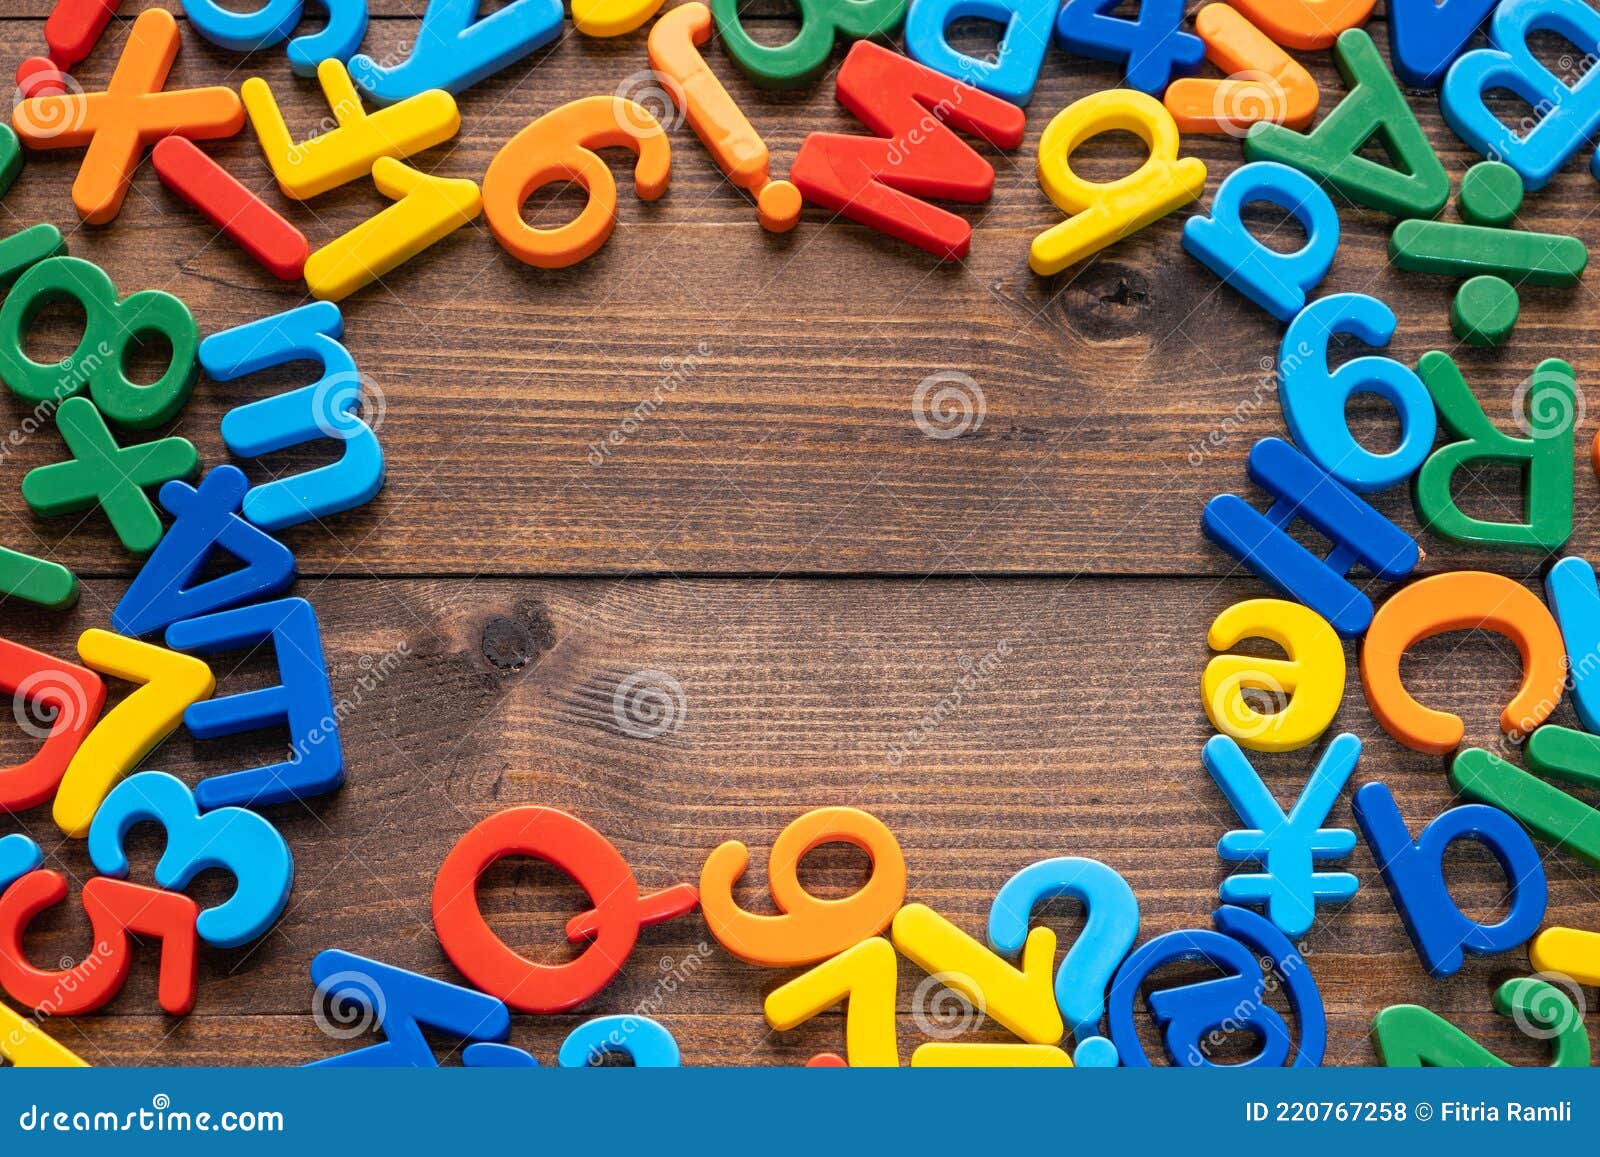 Colorful Plastic Letters And Numbers On Wooden Background Stock Photo